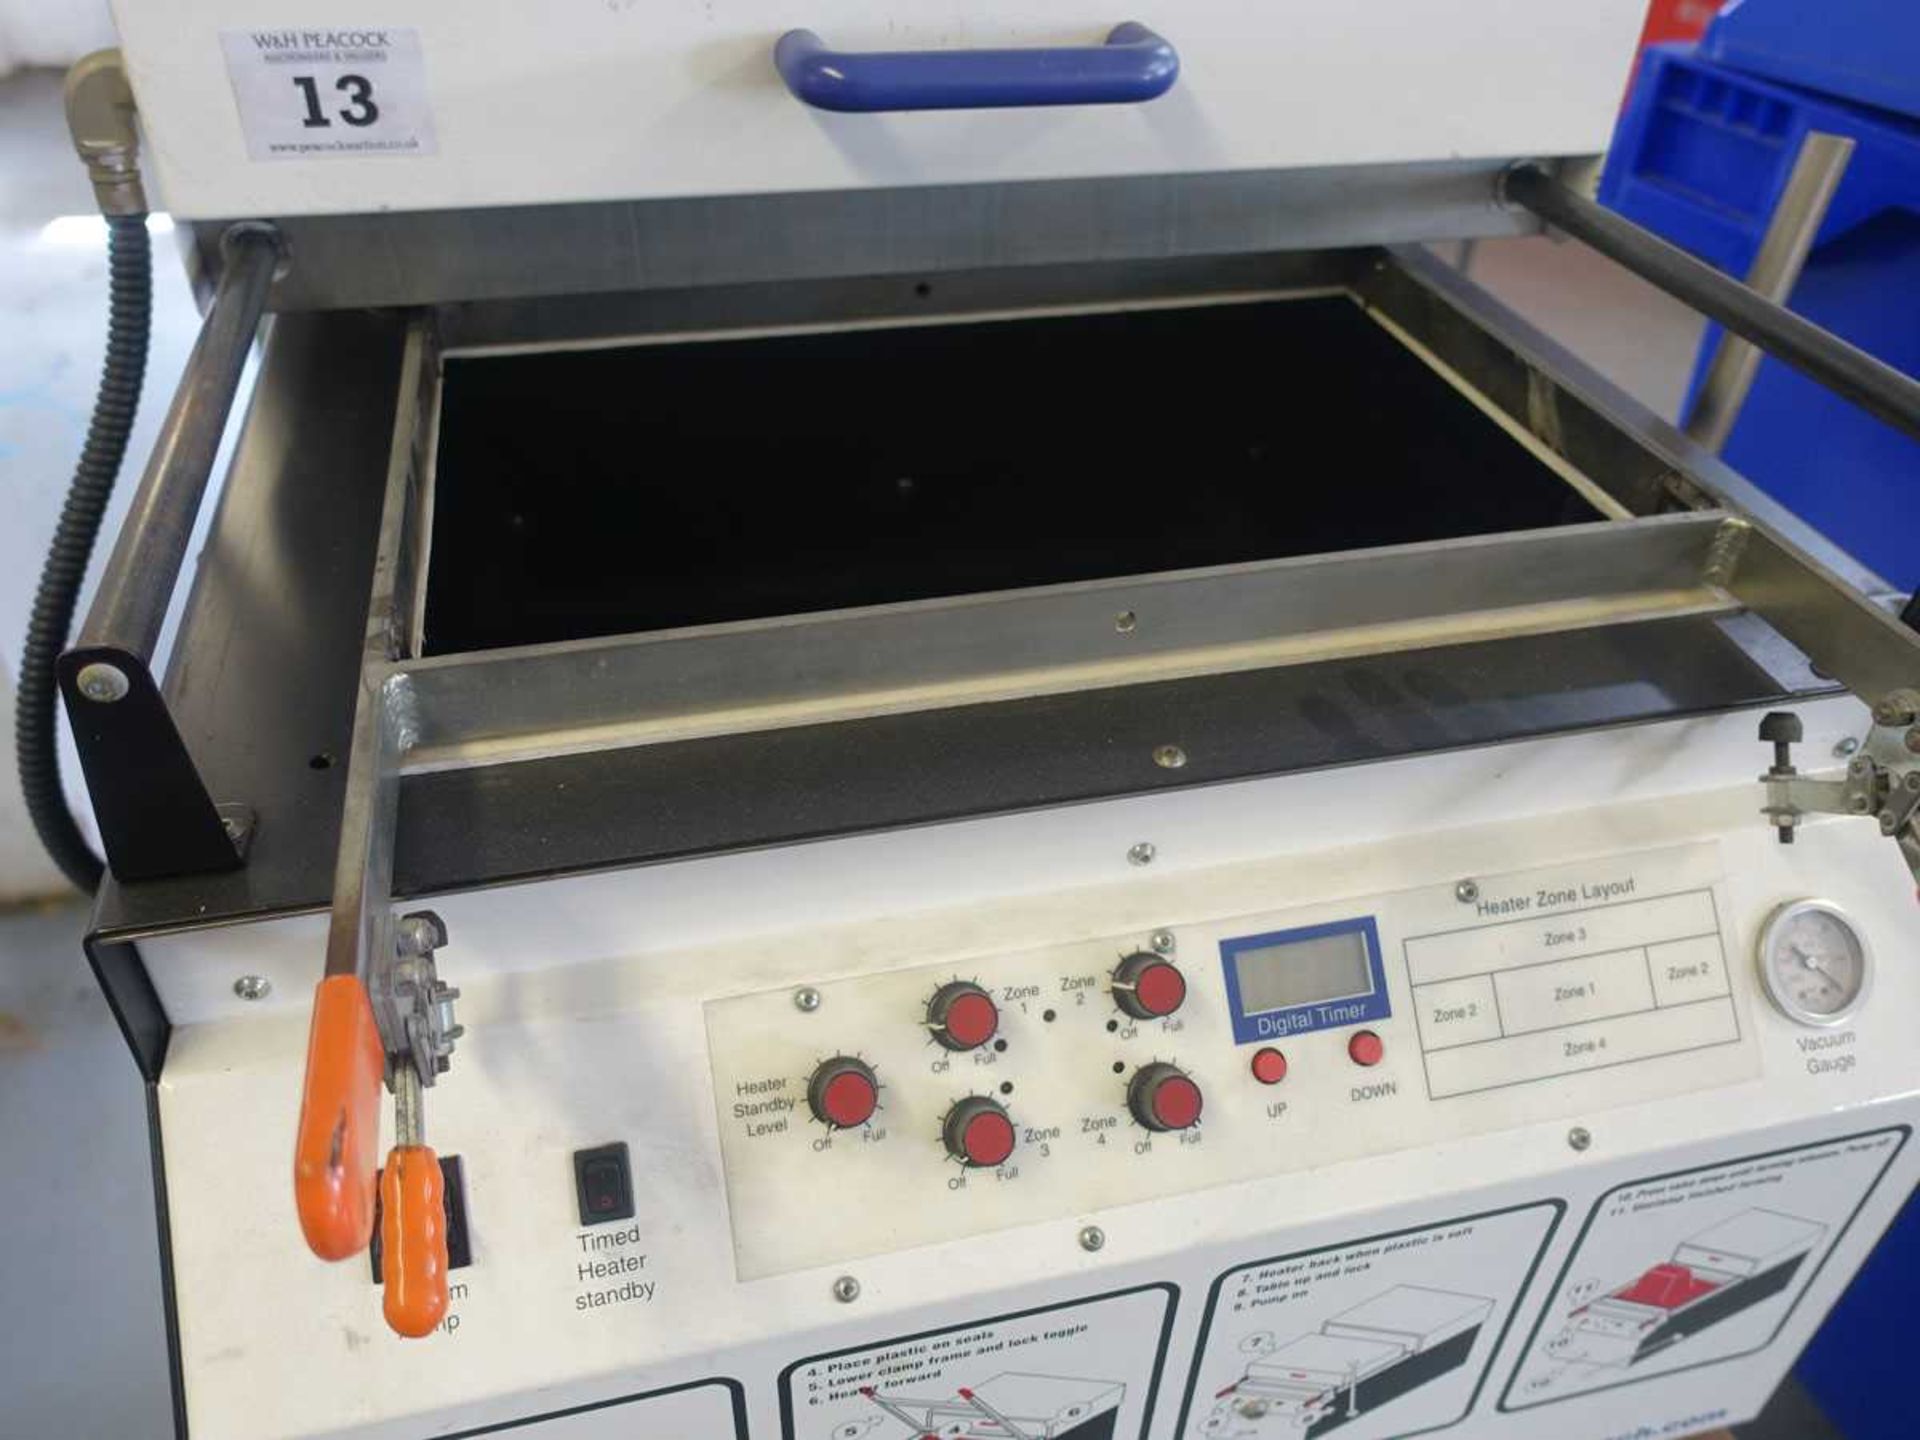 +VAT Formech 300X quartz heated plastic vacuum forming machine, single phase electric with cabinet - Image 3 of 5